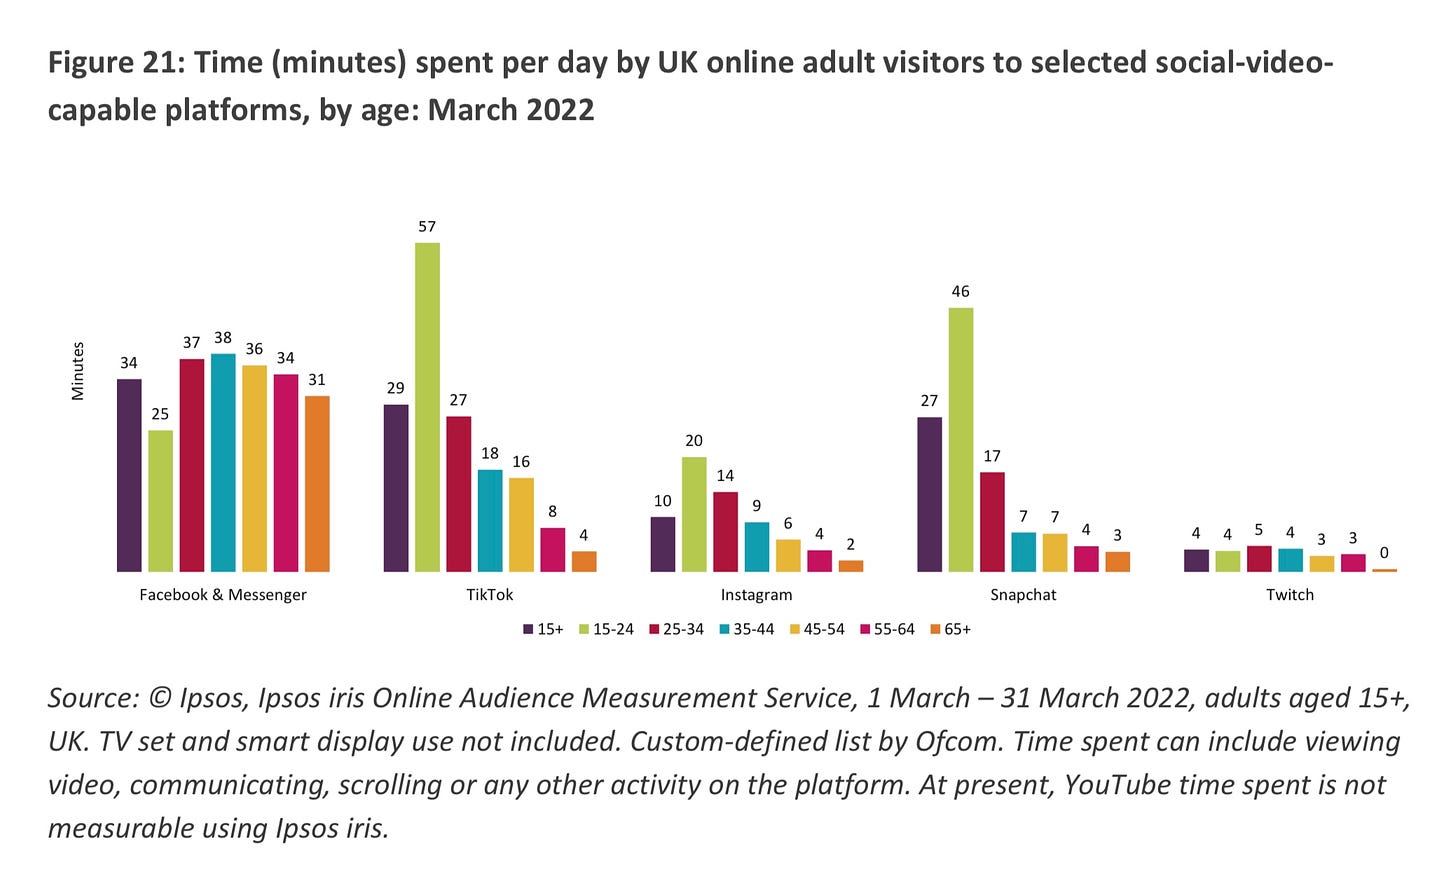 Chart showing time spent per day by UK online adult visitors to selected social-video capable platforms by age